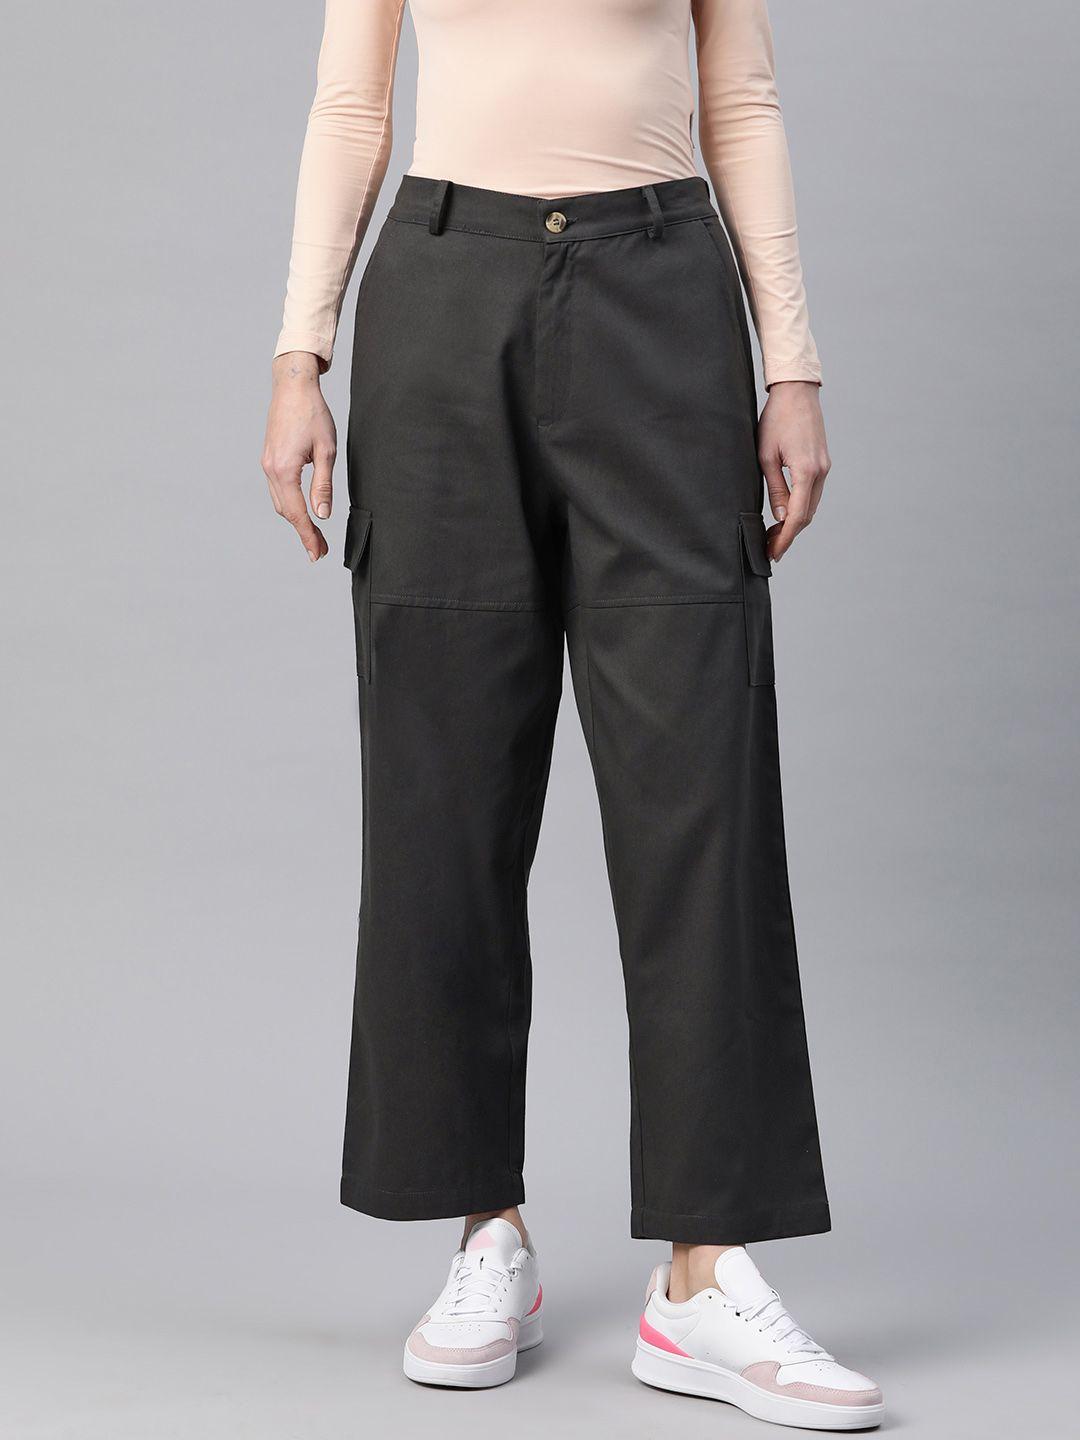 popnetic-flat-front-high-rise-pure-cotton-cargos